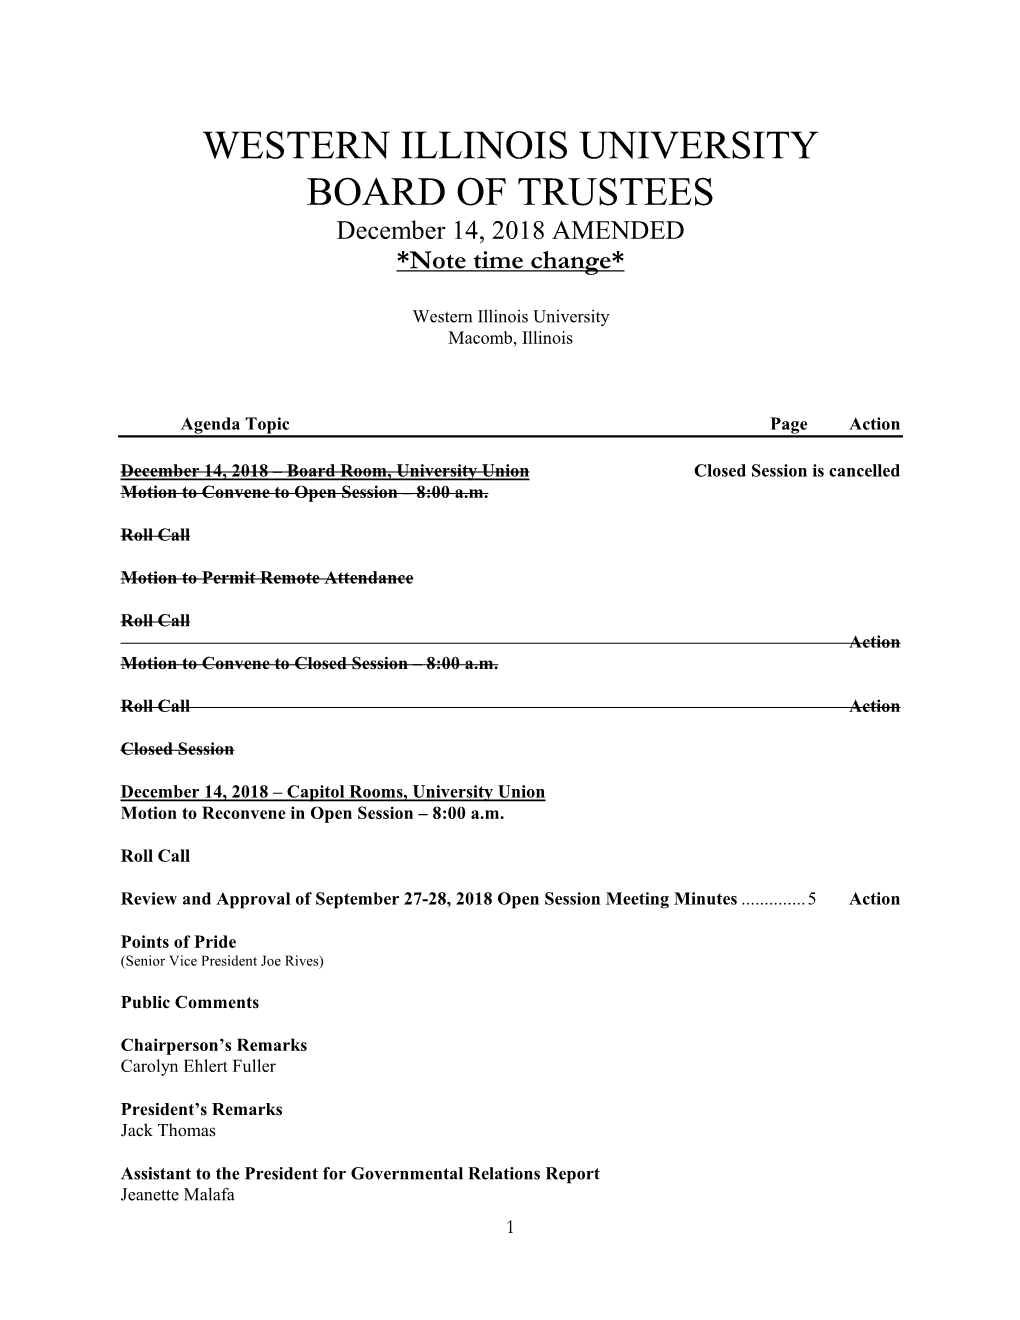 WESTERN ILLINOIS UNIVERSITY BOARD of TRUSTEES December 14, 2018 AMENDED *Note Time Change*